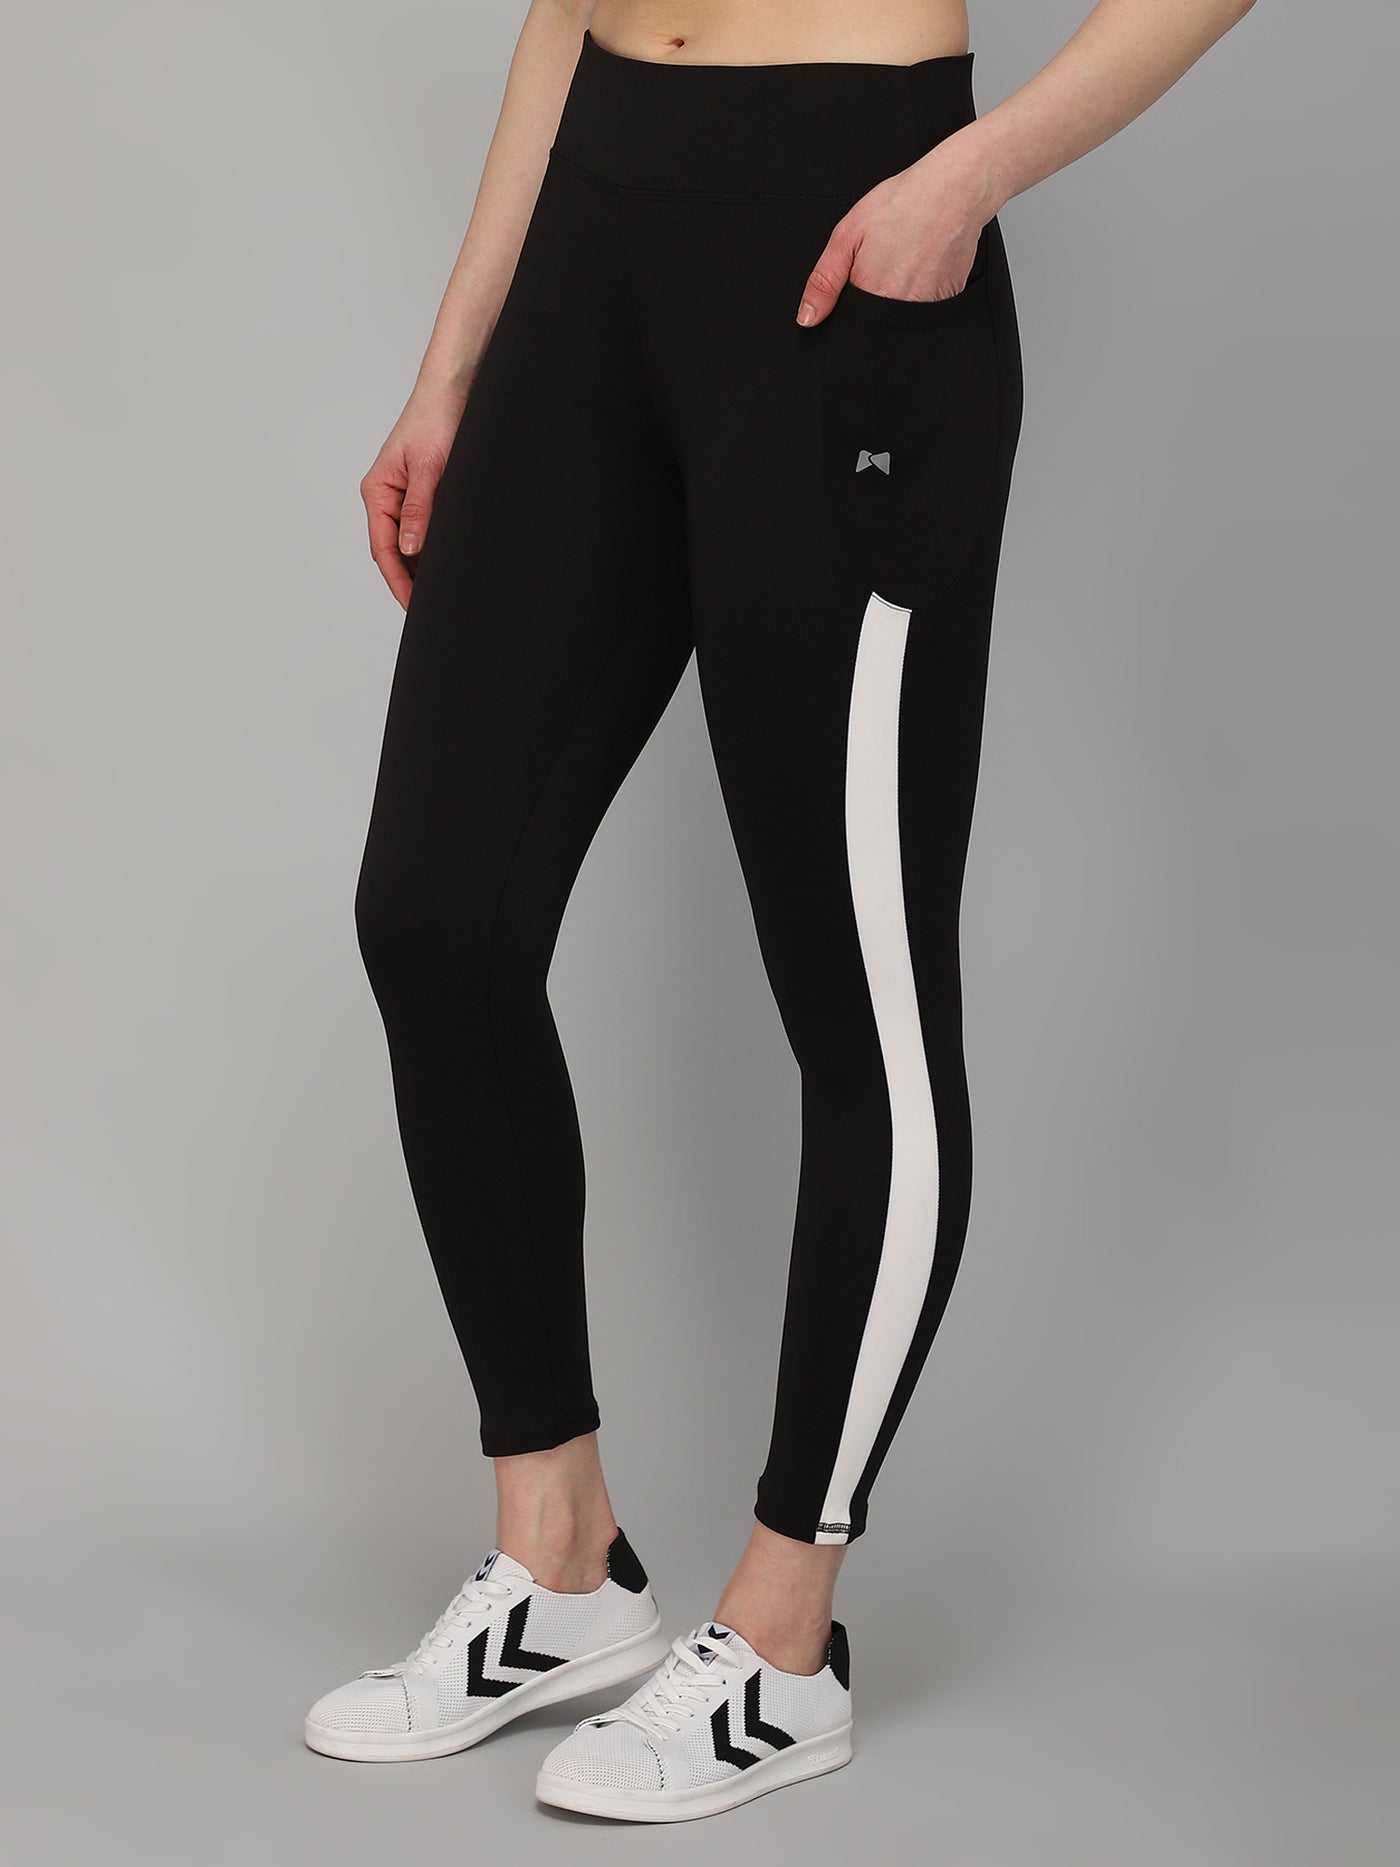 High Waist With Both Side Pockets Tight - Black